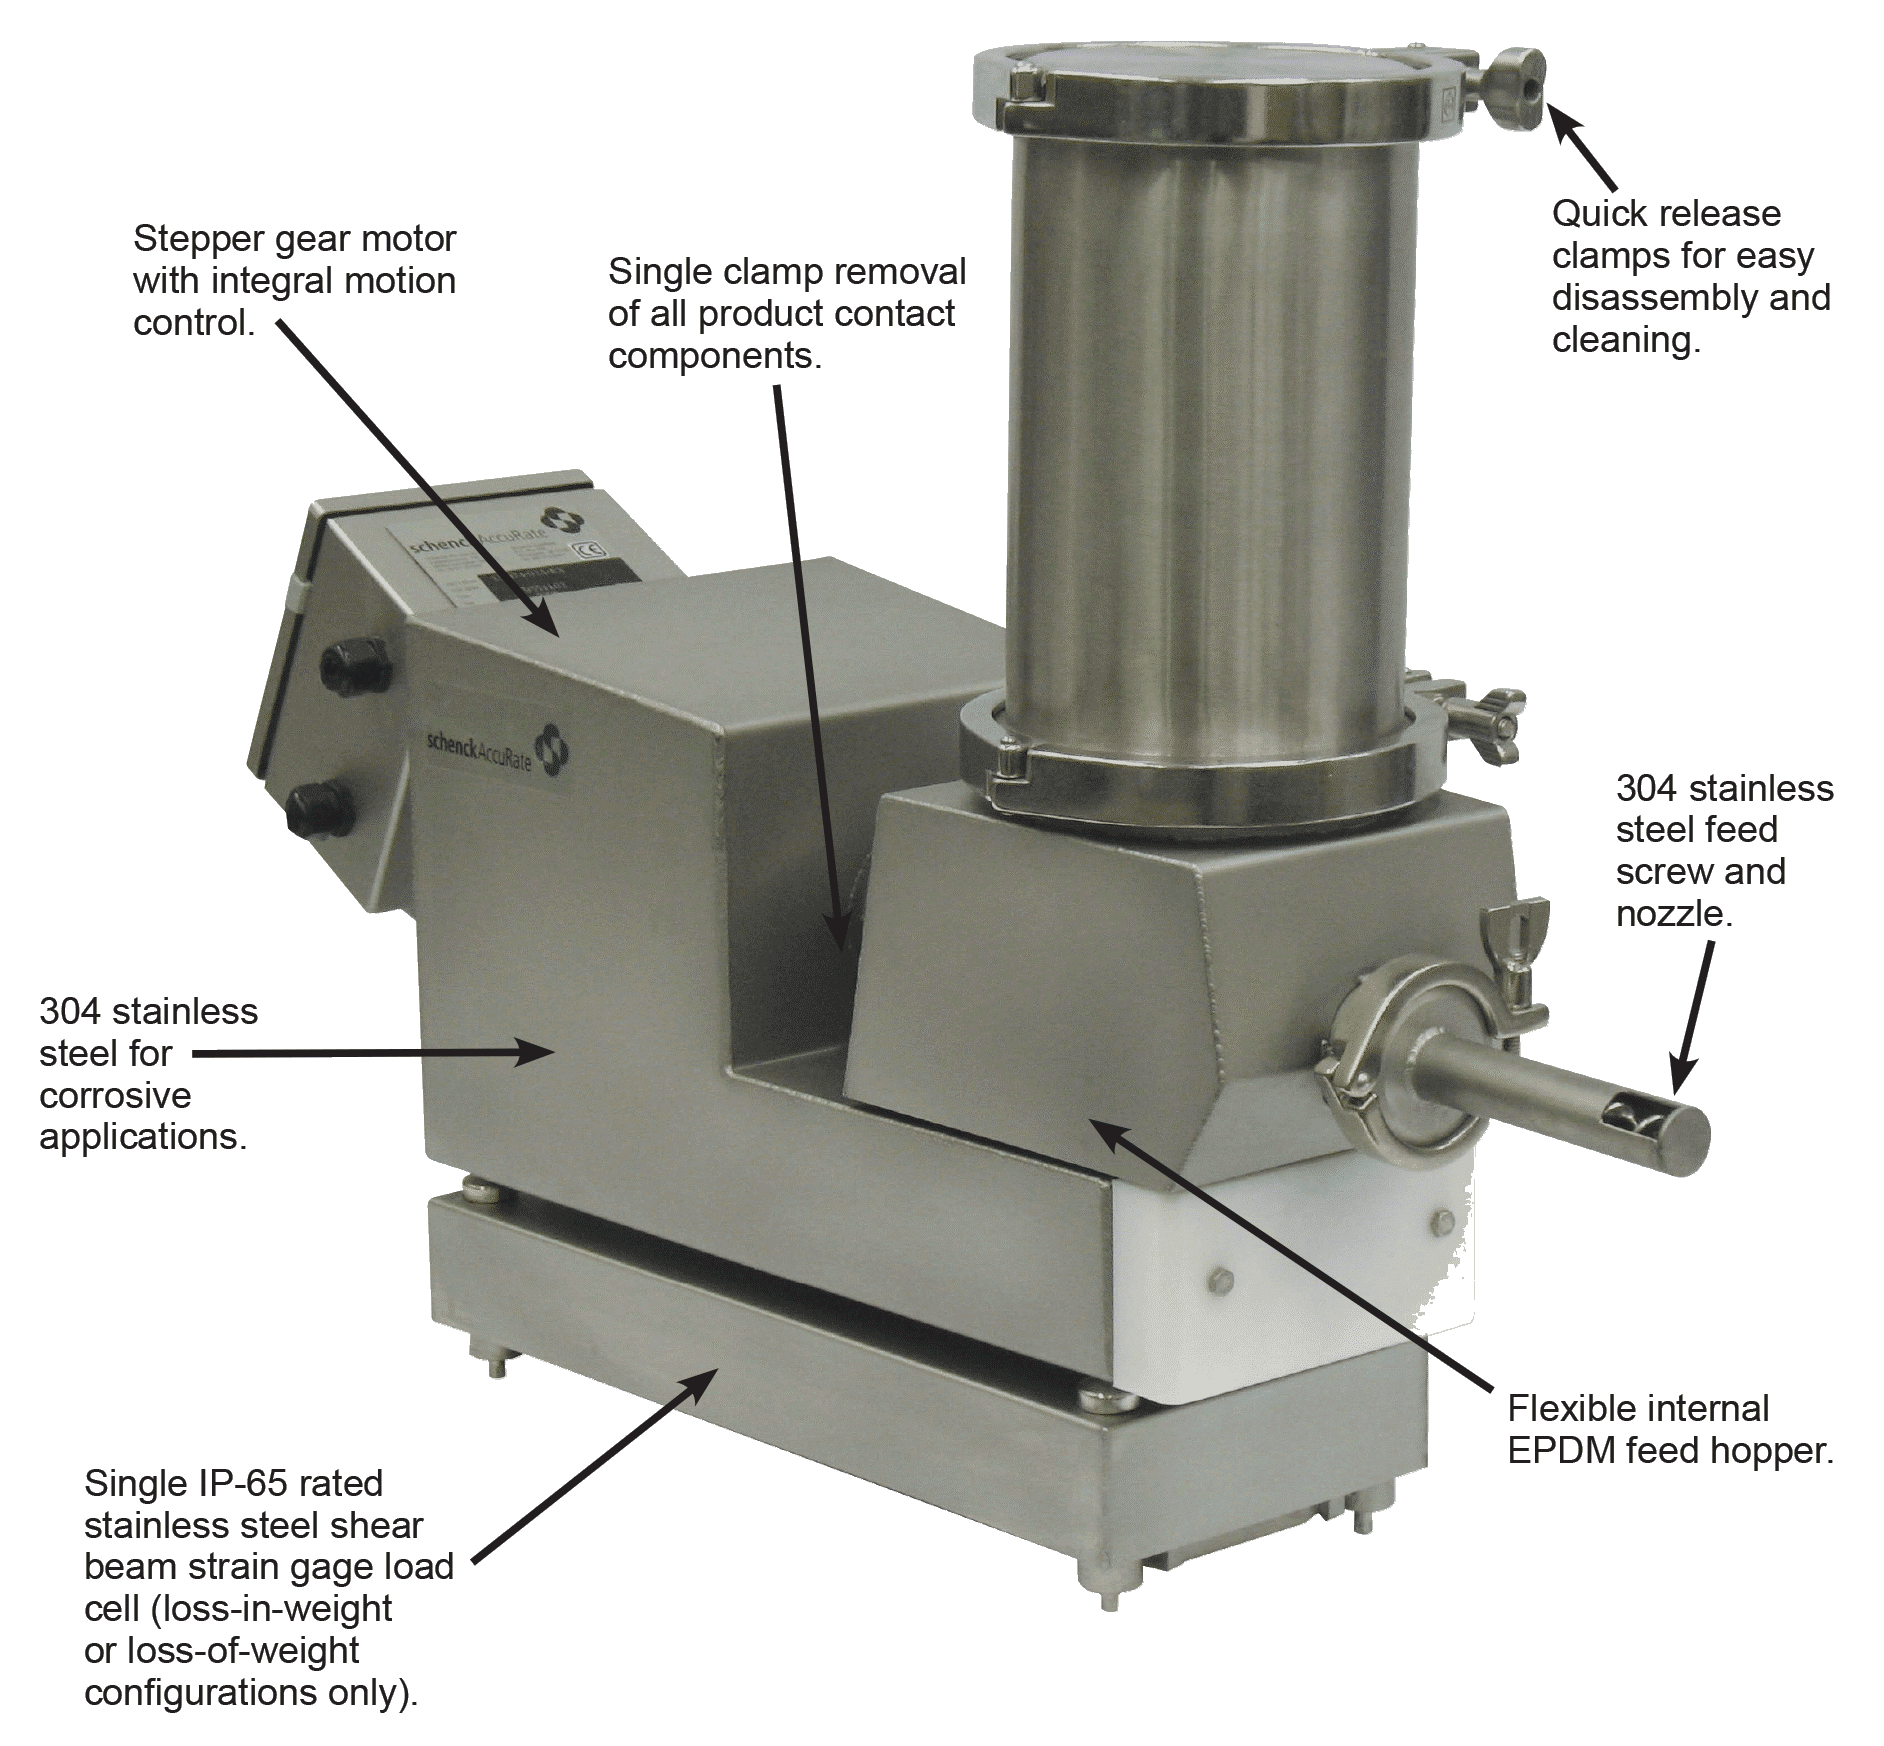 Benefits of high precision feeder are many